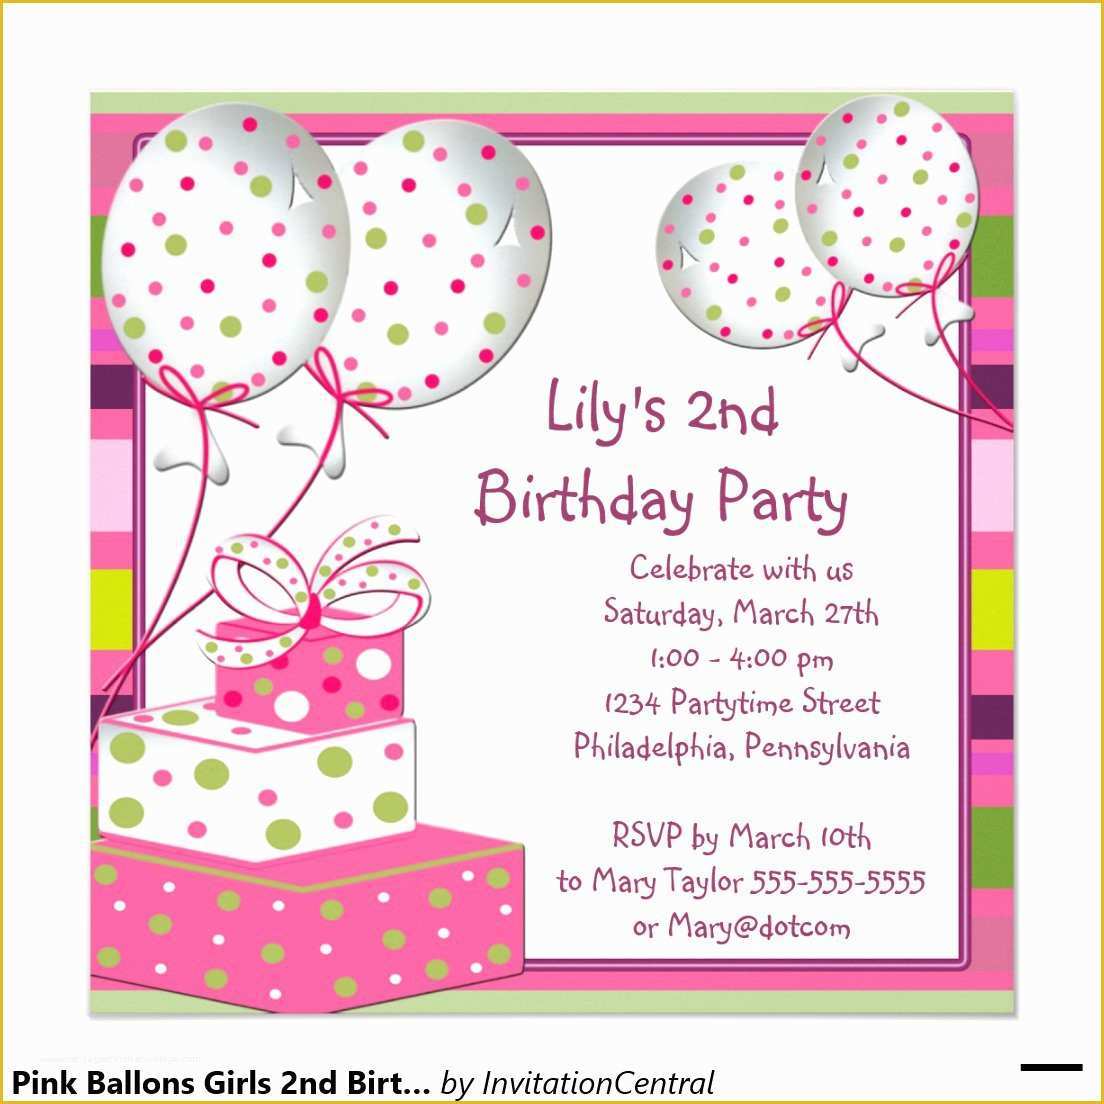 Birthday Party Invitations for Kids Free Templates Of Birthday Party Invitation Card